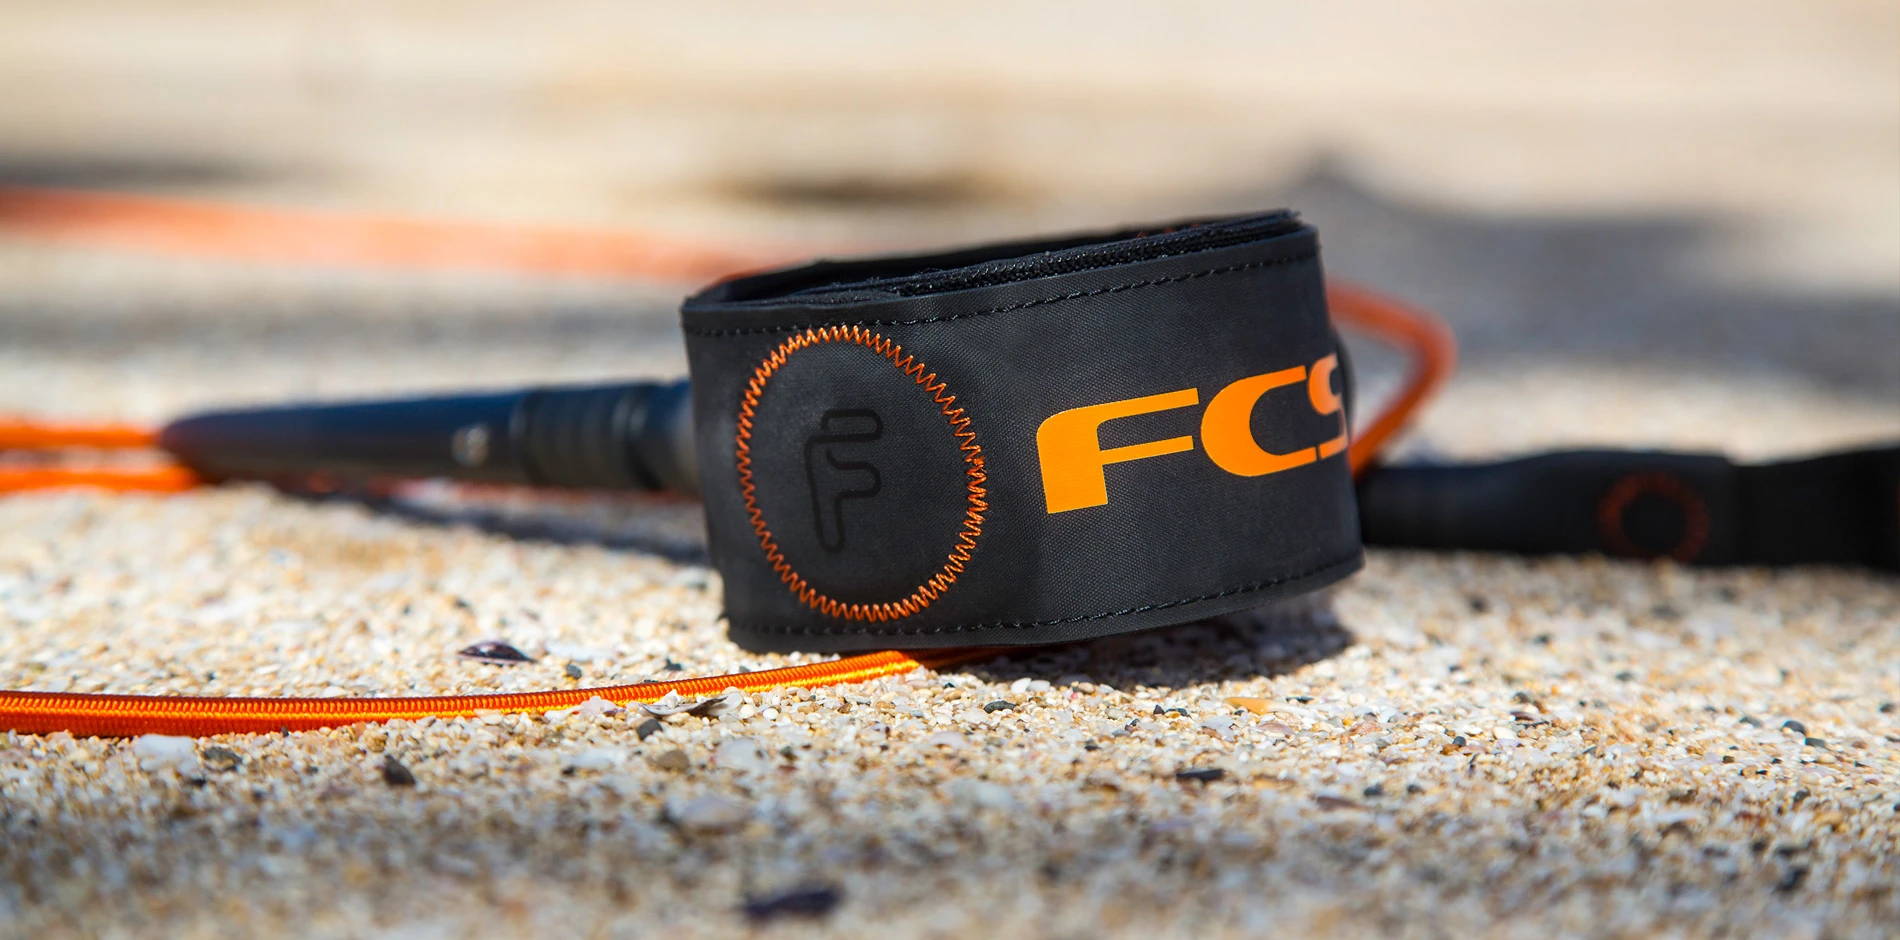 FREEDOM LEASH WINS ACCESSORY PRODUCT OF THE YEAR